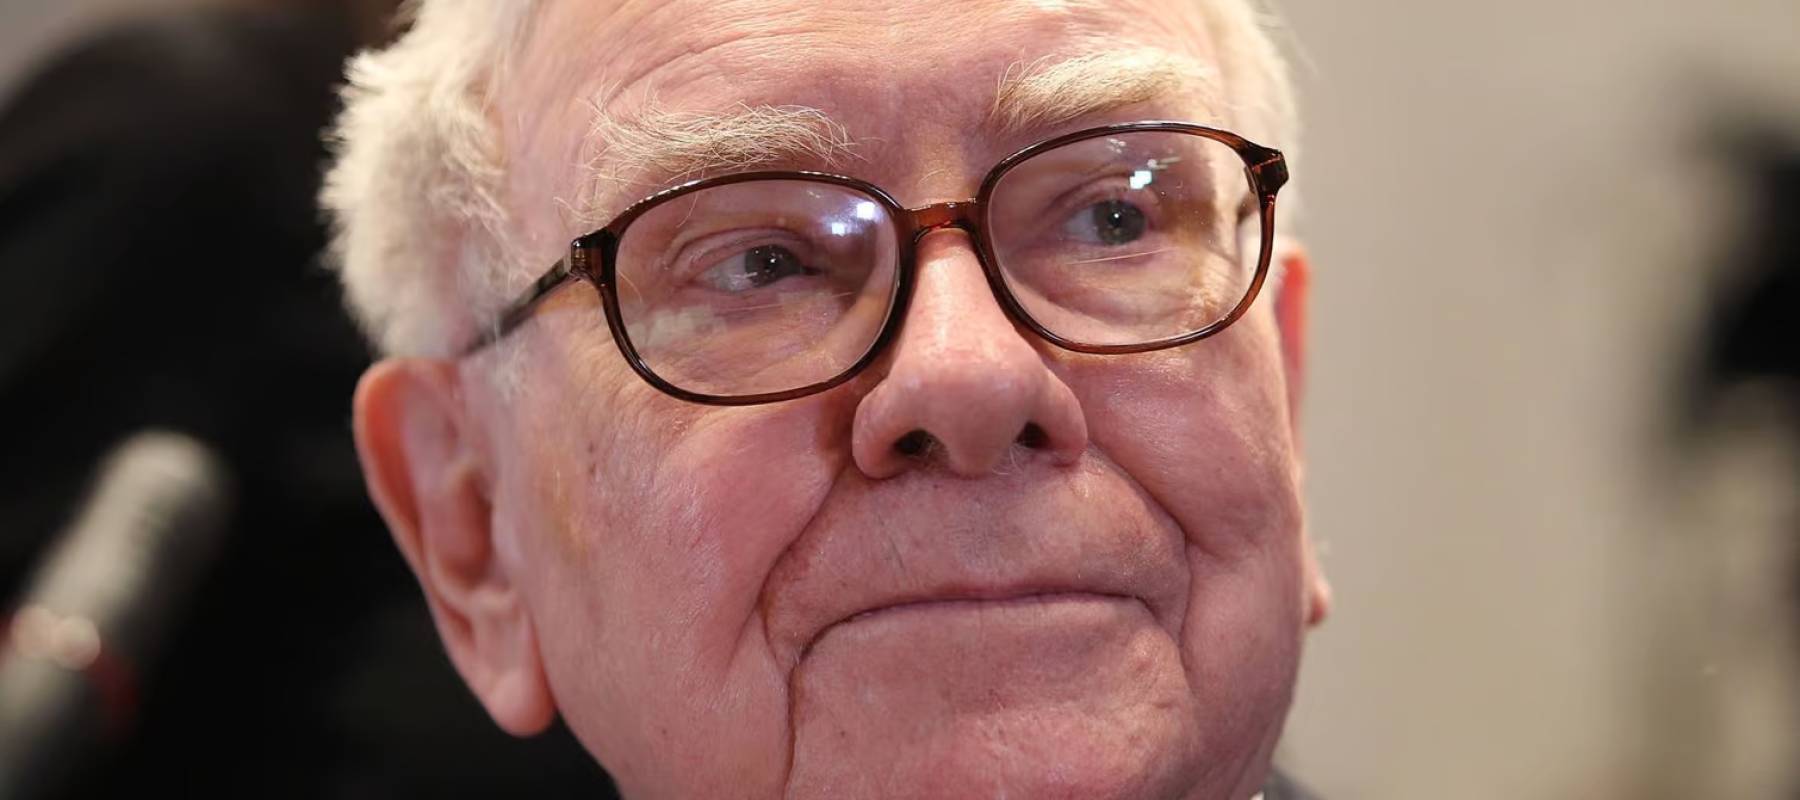 Warren Buffett, Chairman and CEO of Berkshire Hathaway, prior to testifying before the Financial Crisis Inquiry Commission at The New School in New York, June 2, 2010.